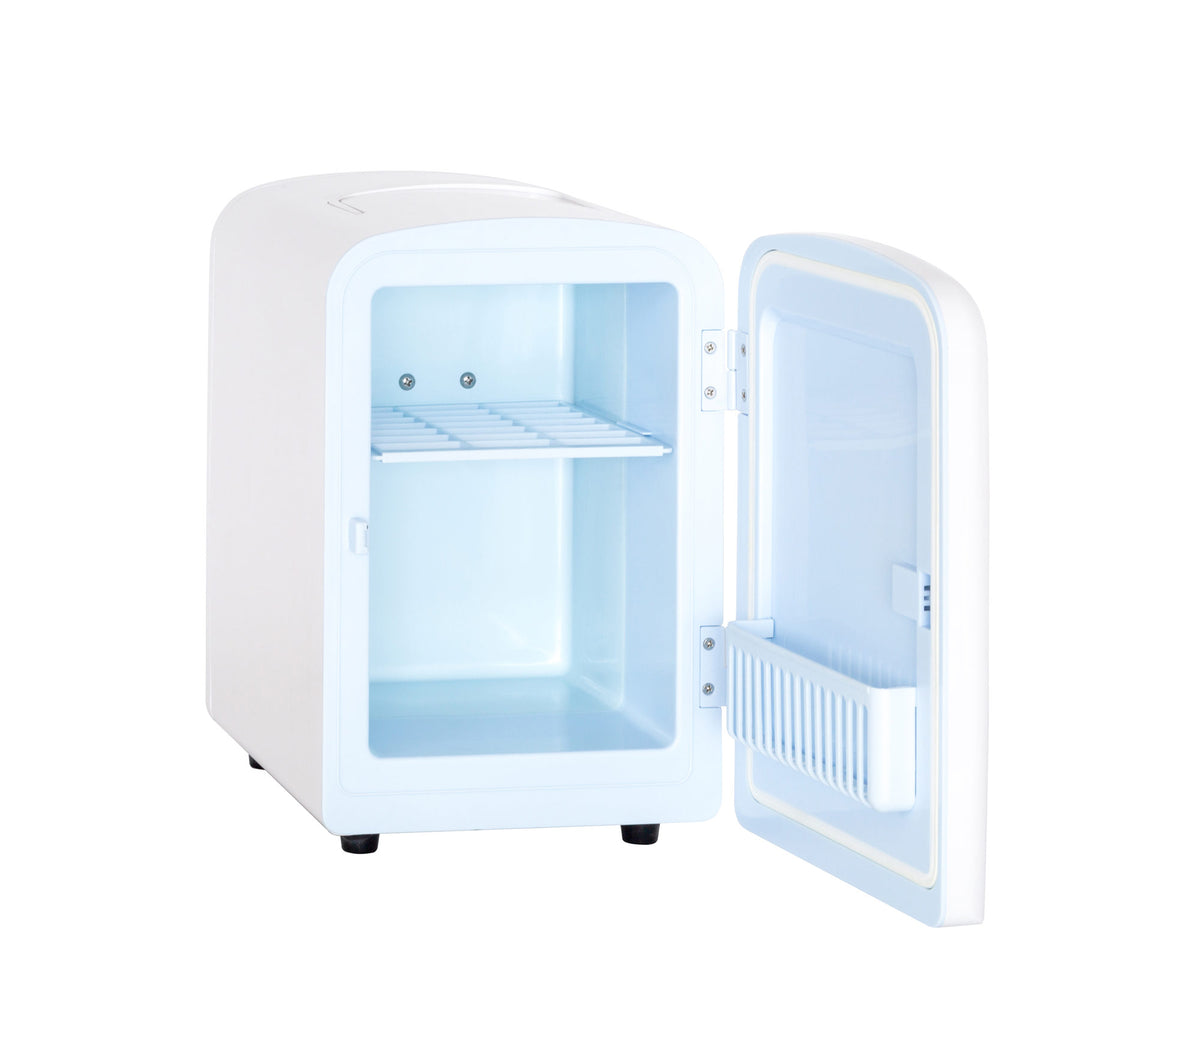 BF550 Cosmetics, Beauty & Skincare Fridge with the door open showing the internal and door shelves and a light-blue colour inside..